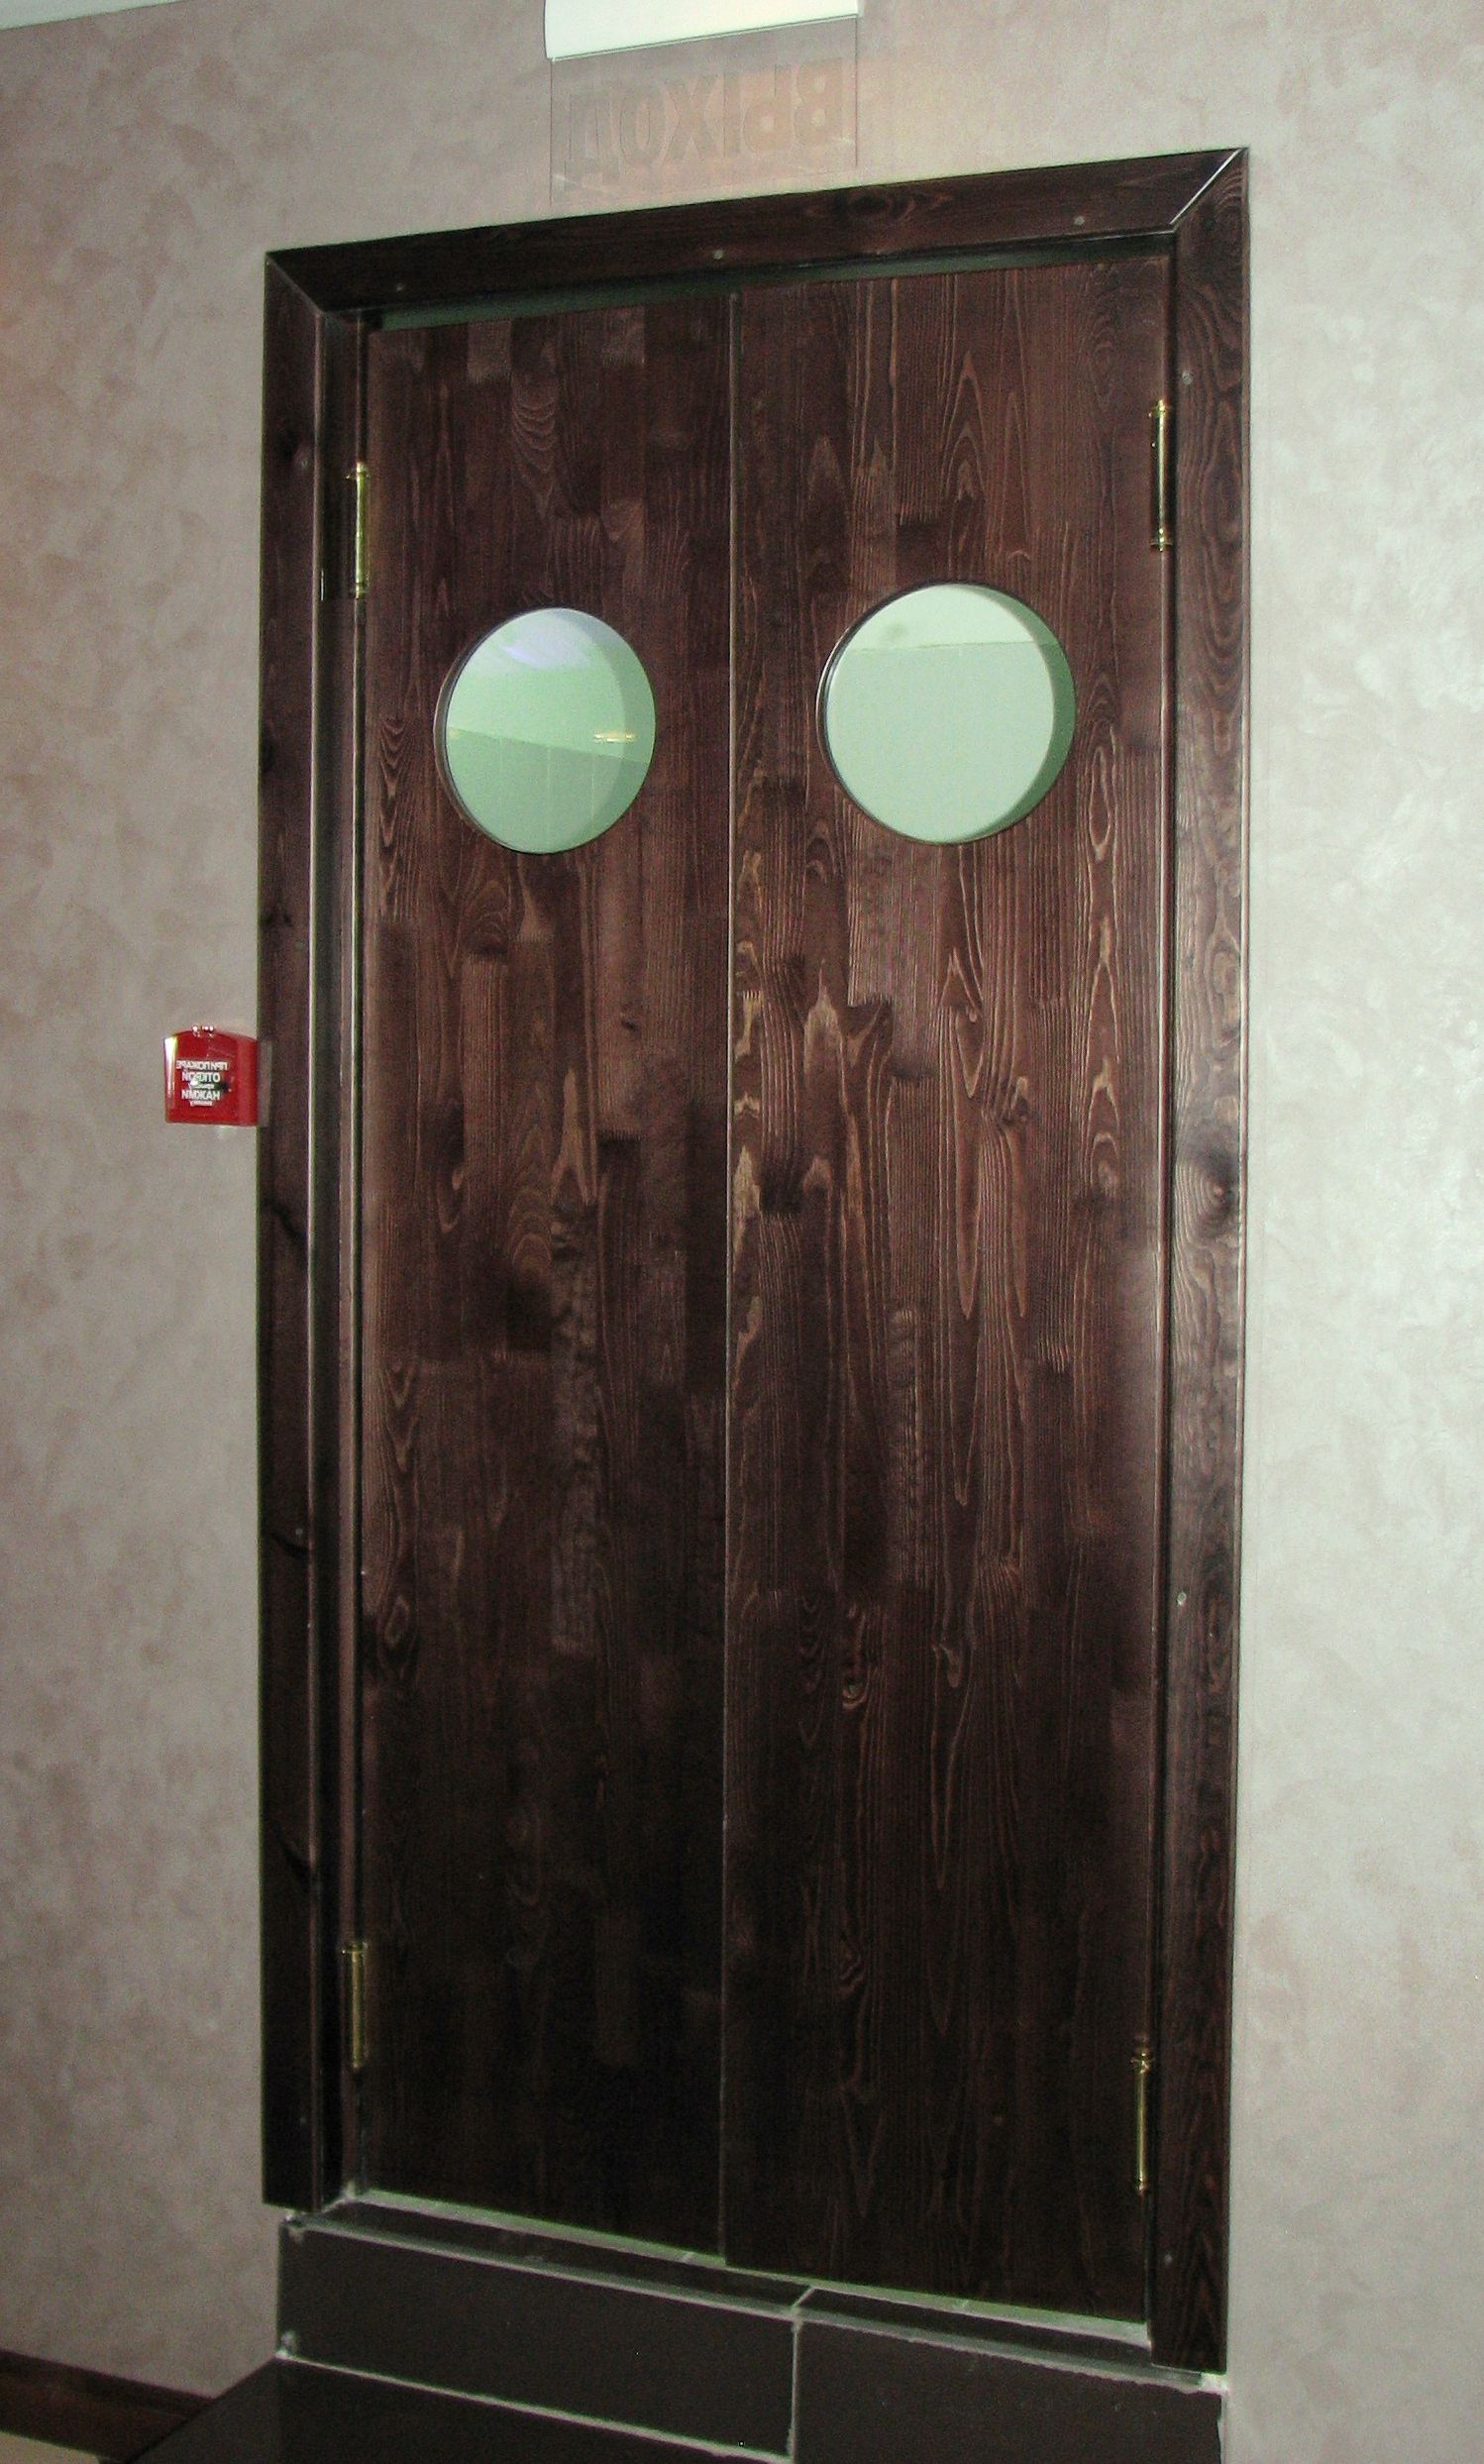 Swing door made of natural wood covered with stain